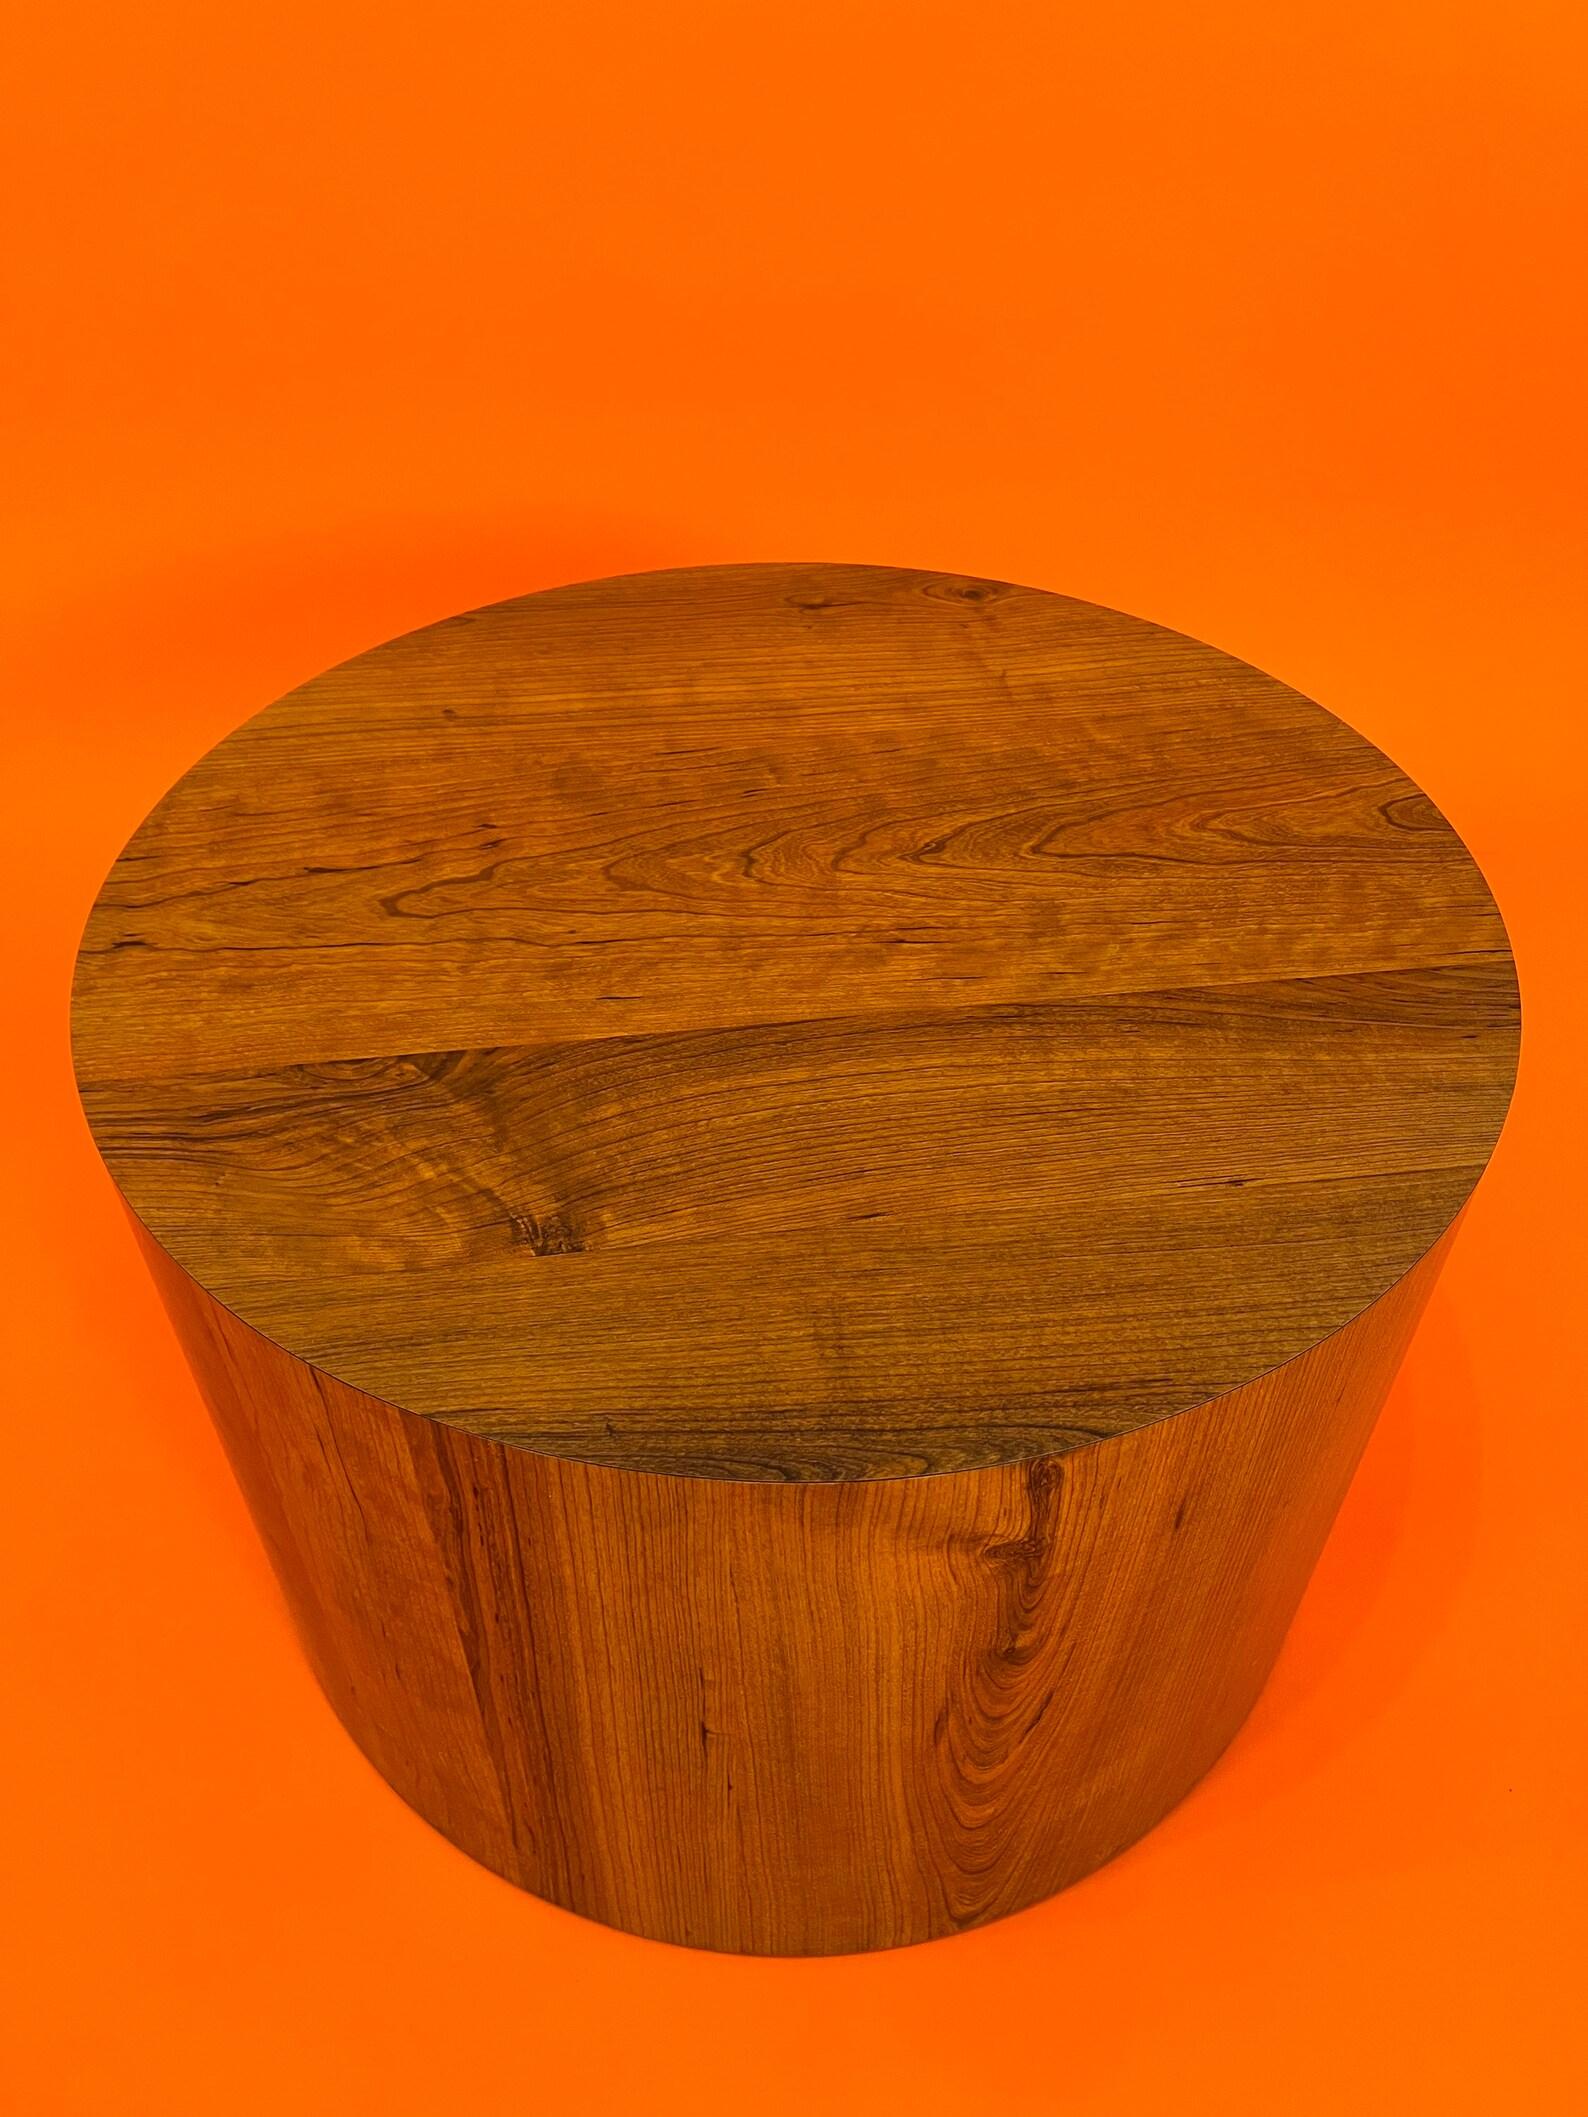 Midcentury teak circle drum shaped coffee table end table 1970s circa
Dimensions: diameter 23.5 inches 
Height: 15.5 inches 
Very good condition sturdy & heavy
The heart glass & the chair are not for staging purposes sale and are not for sell in